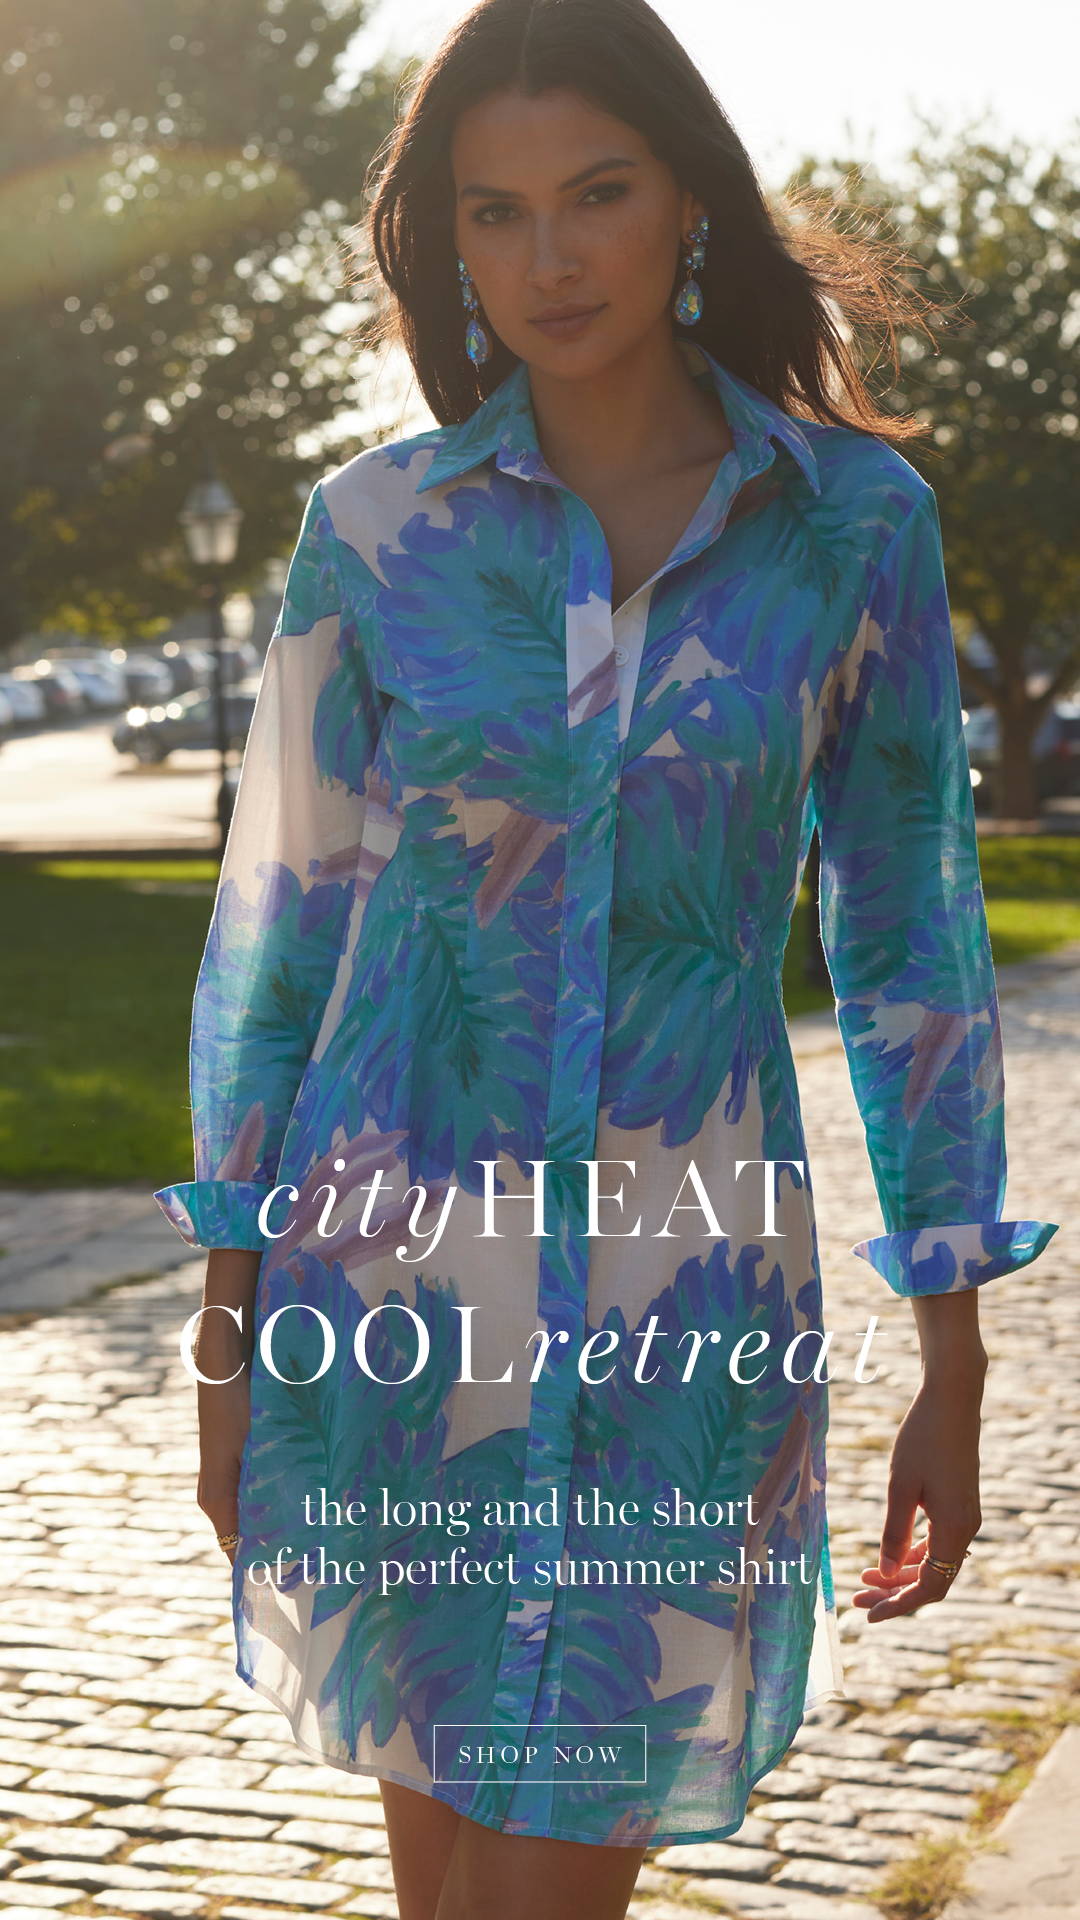 city heat cool retreat | the long and. the short of the perfect summer shirt | Woman wearing short blue palm leaf printed cotton dress for woman's warm weather dressing